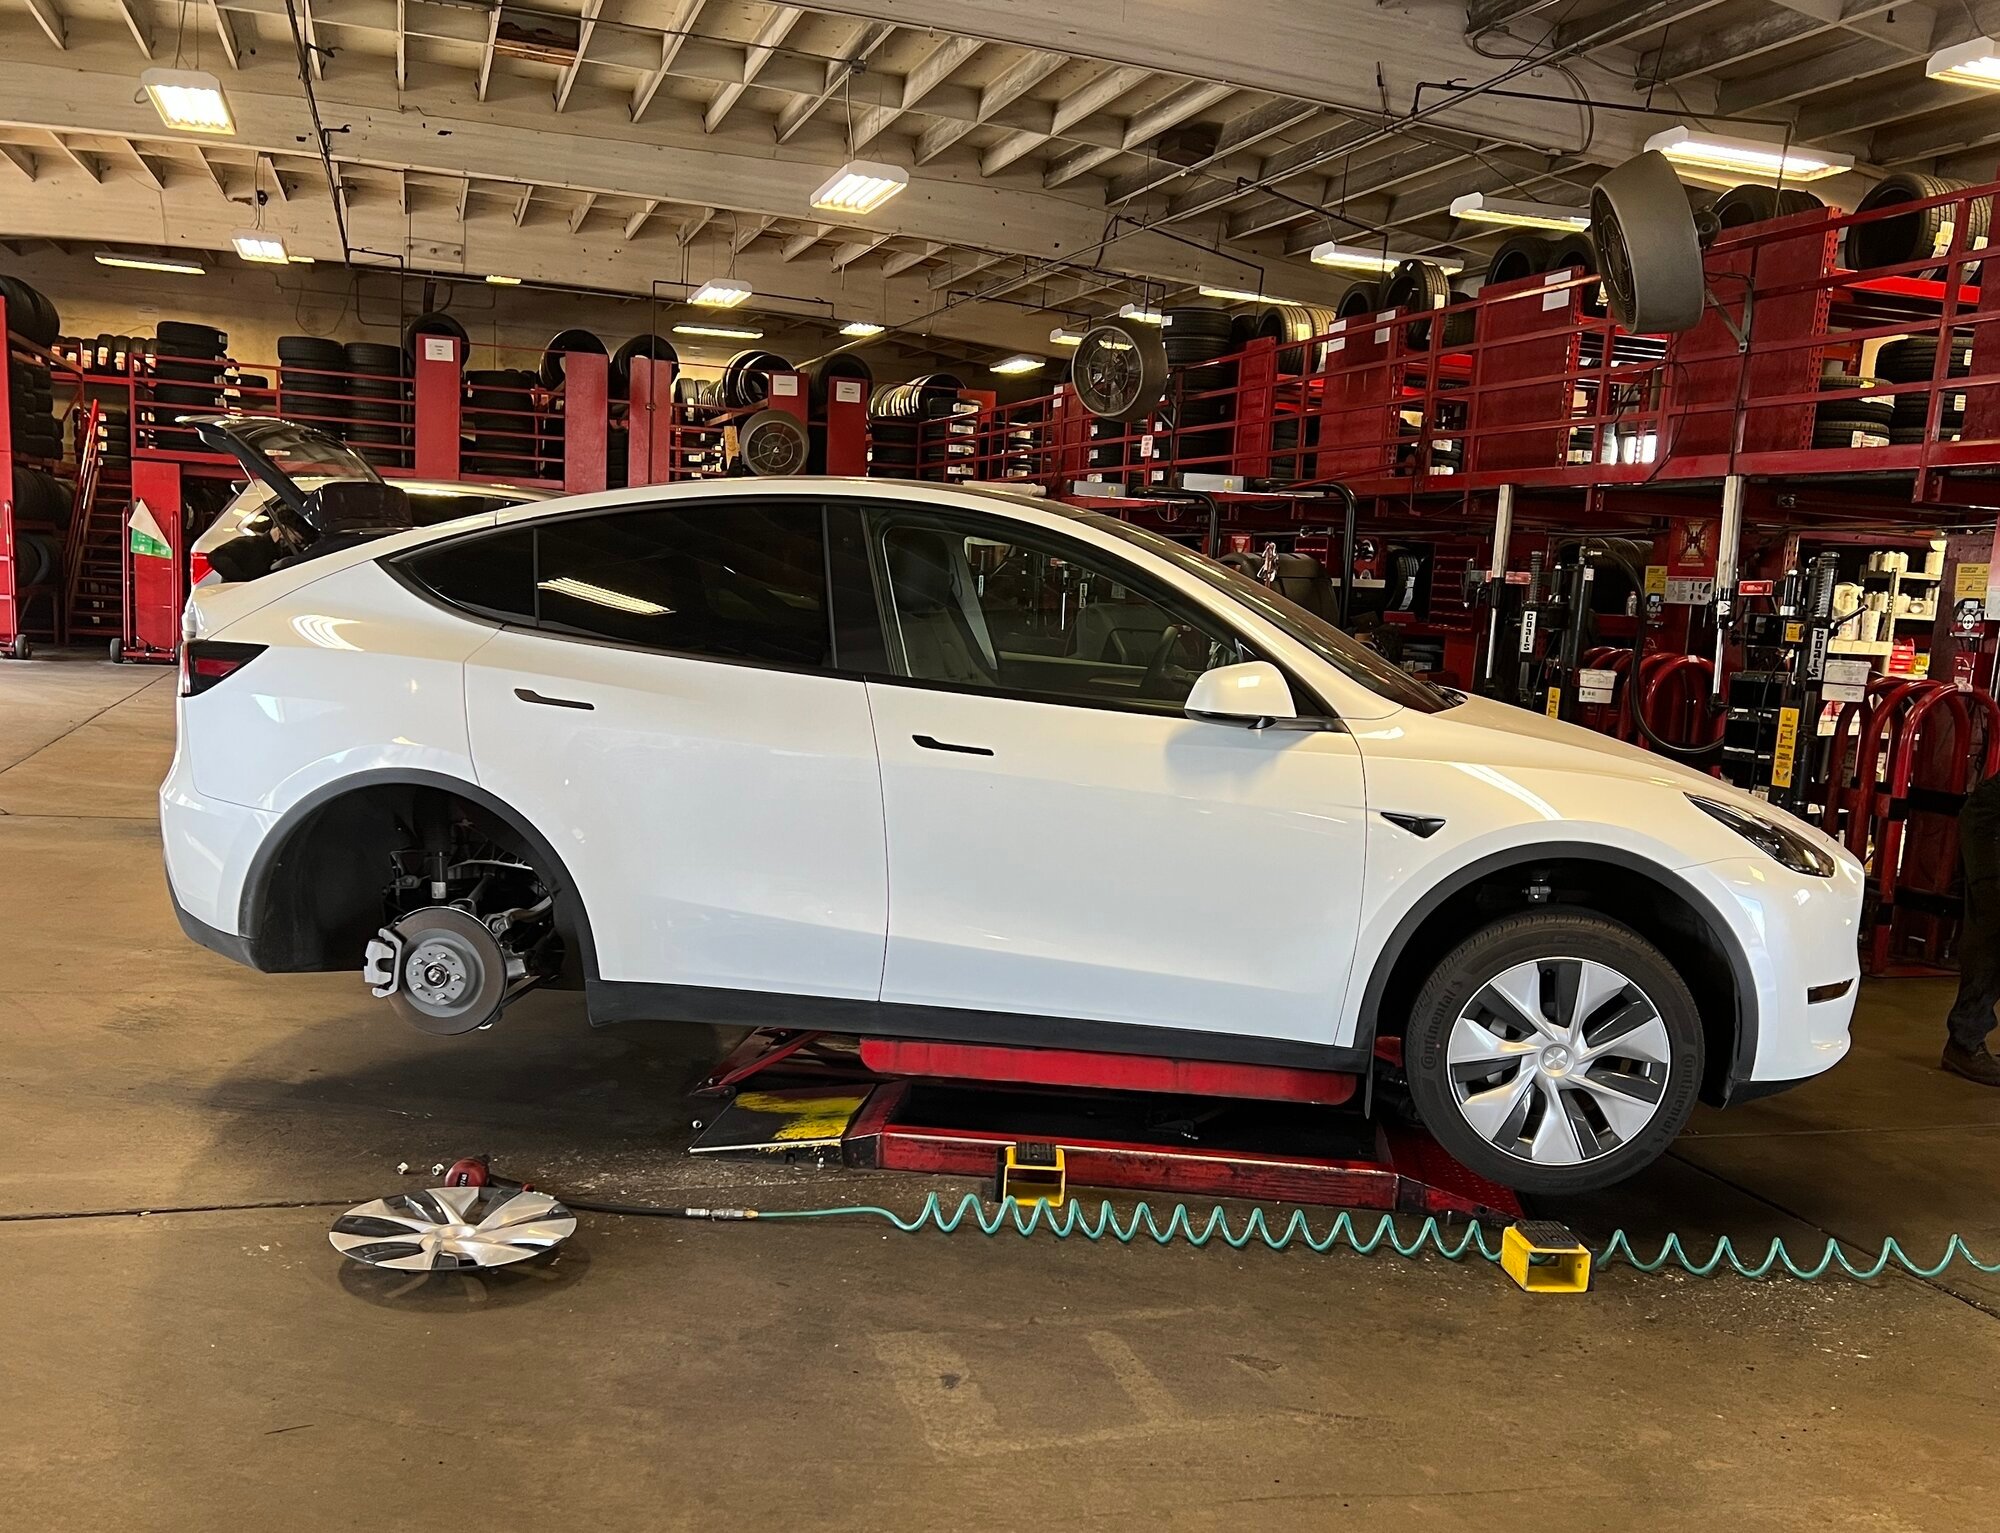 America's tire lifting model Y without jack pad - is it safe